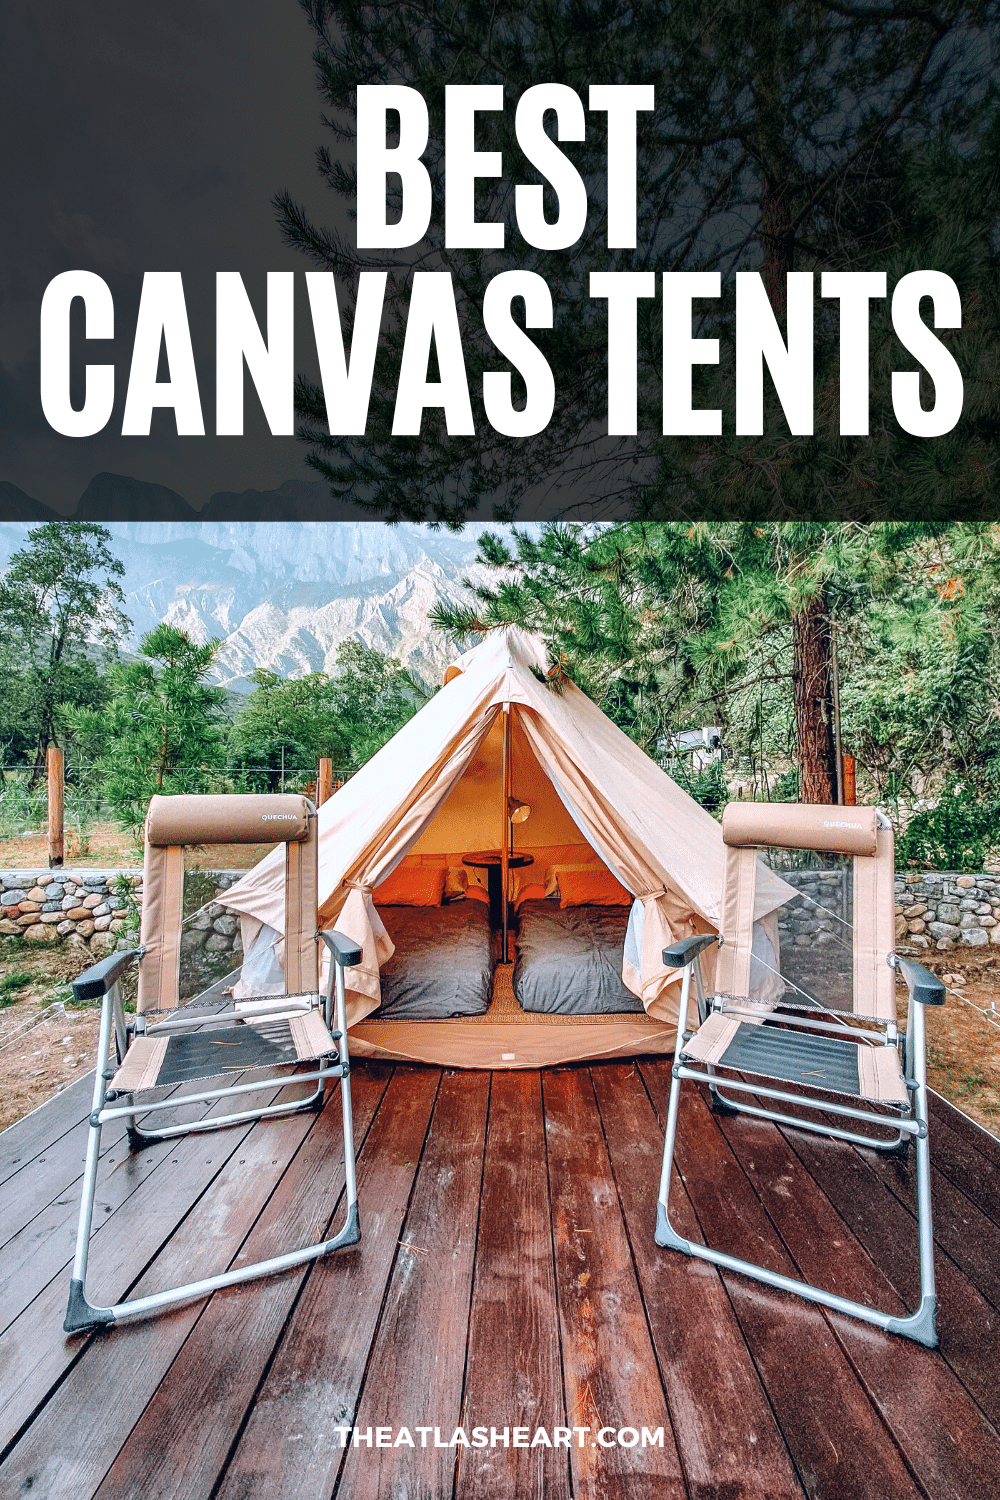 13 Best Canvas Tents for Every Occasion (2022 Buying Guide)